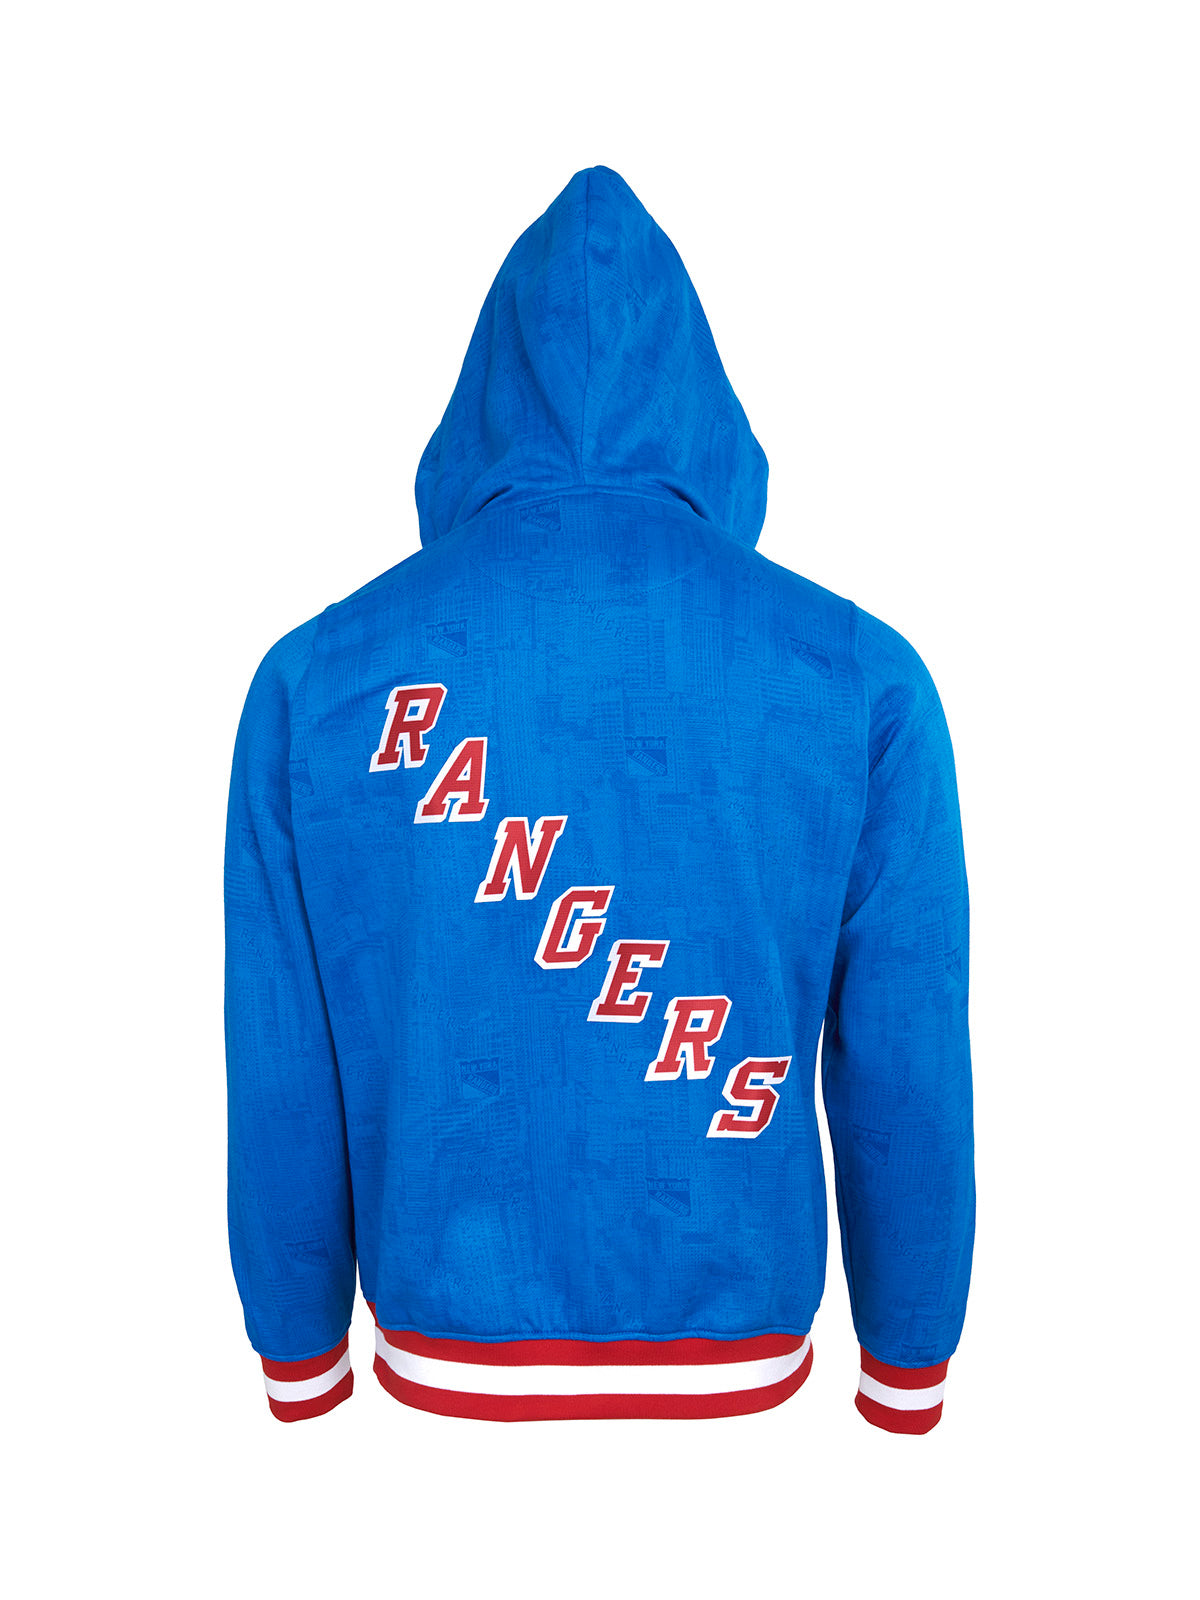 New York Rangers Hoodie - Show your team spirit, with the iconic team logo patch centered on the back, and proudly display your New York Rangers support in their team colors with this NHL hockey hoodie.